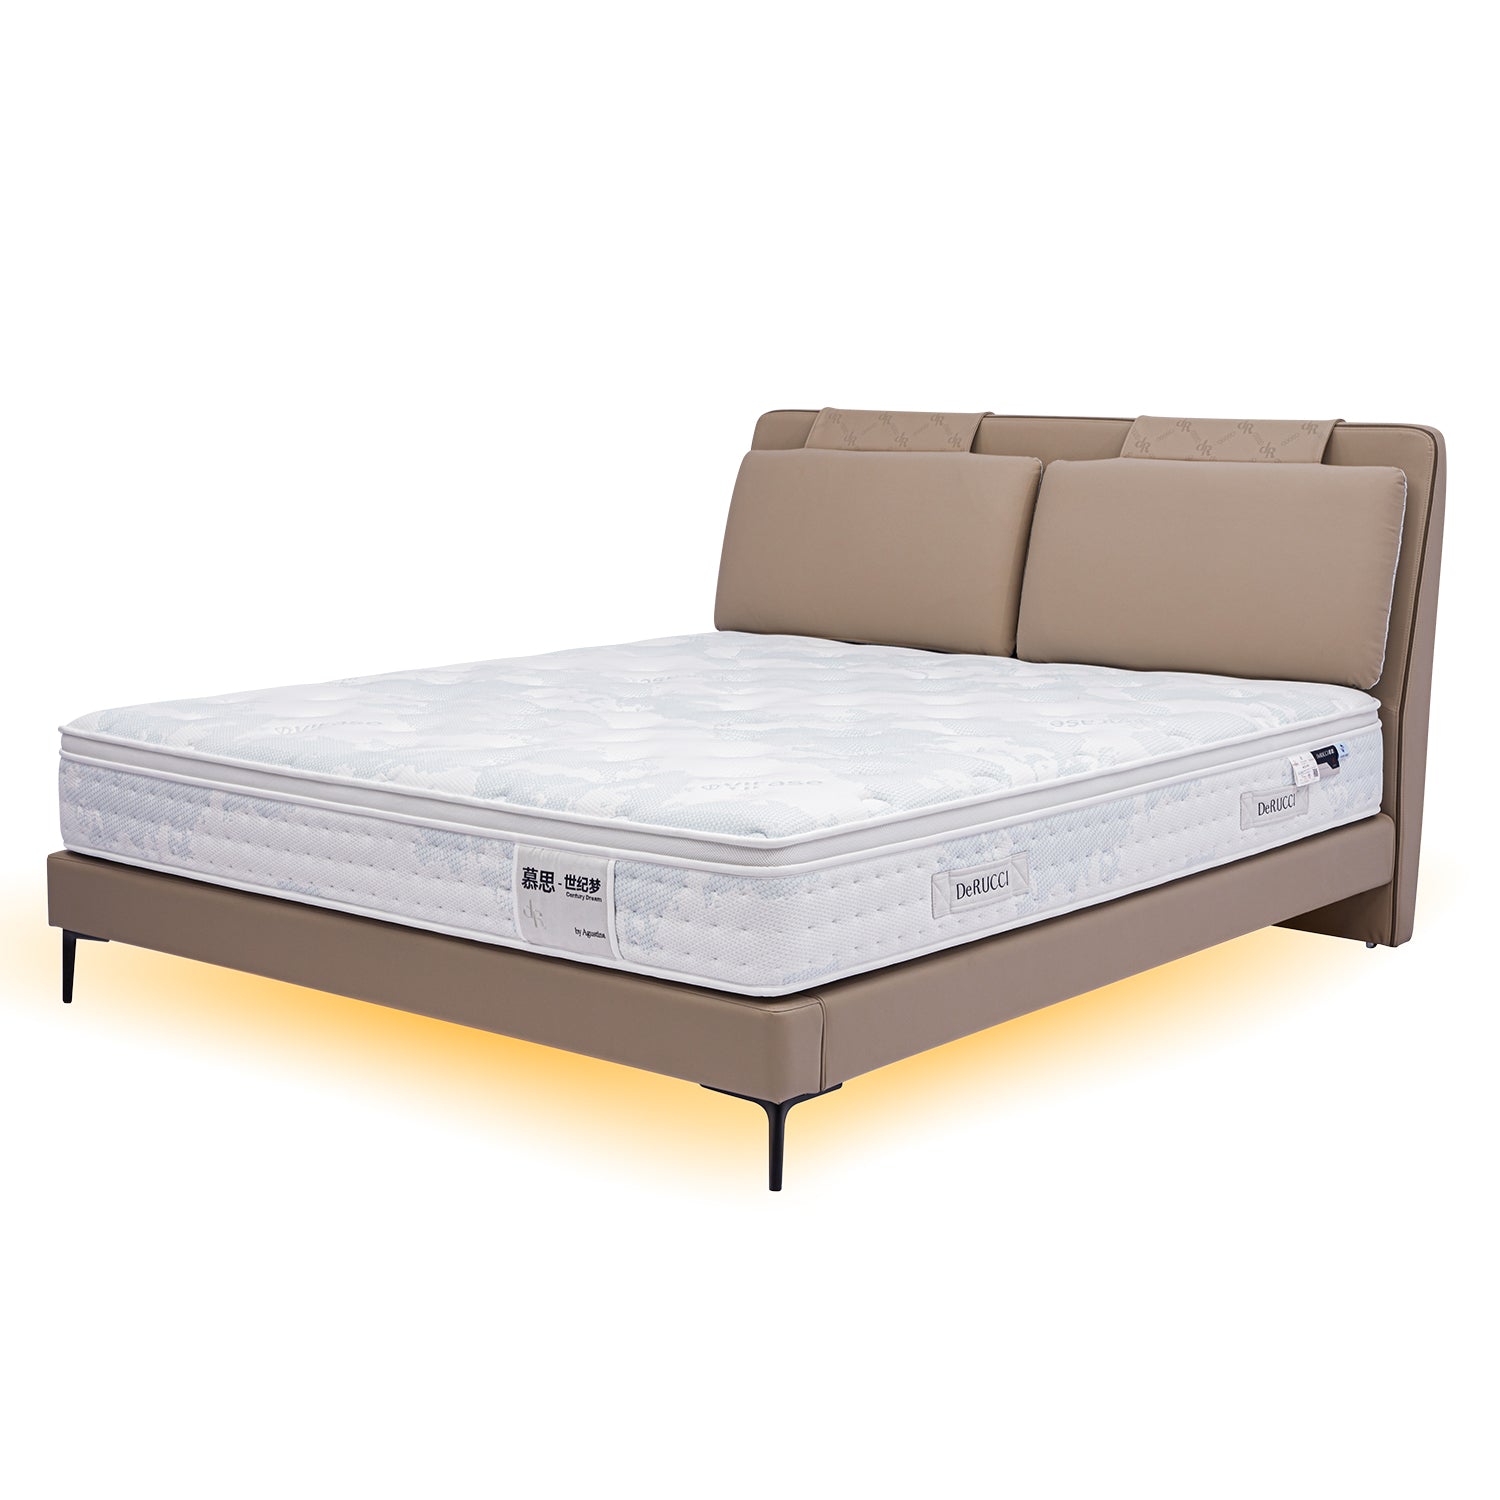 DeRUCCI Bed Frame BOC1-006 with sleek upholstered beige headboard and sturdy base. Includes a comfortable mattress.